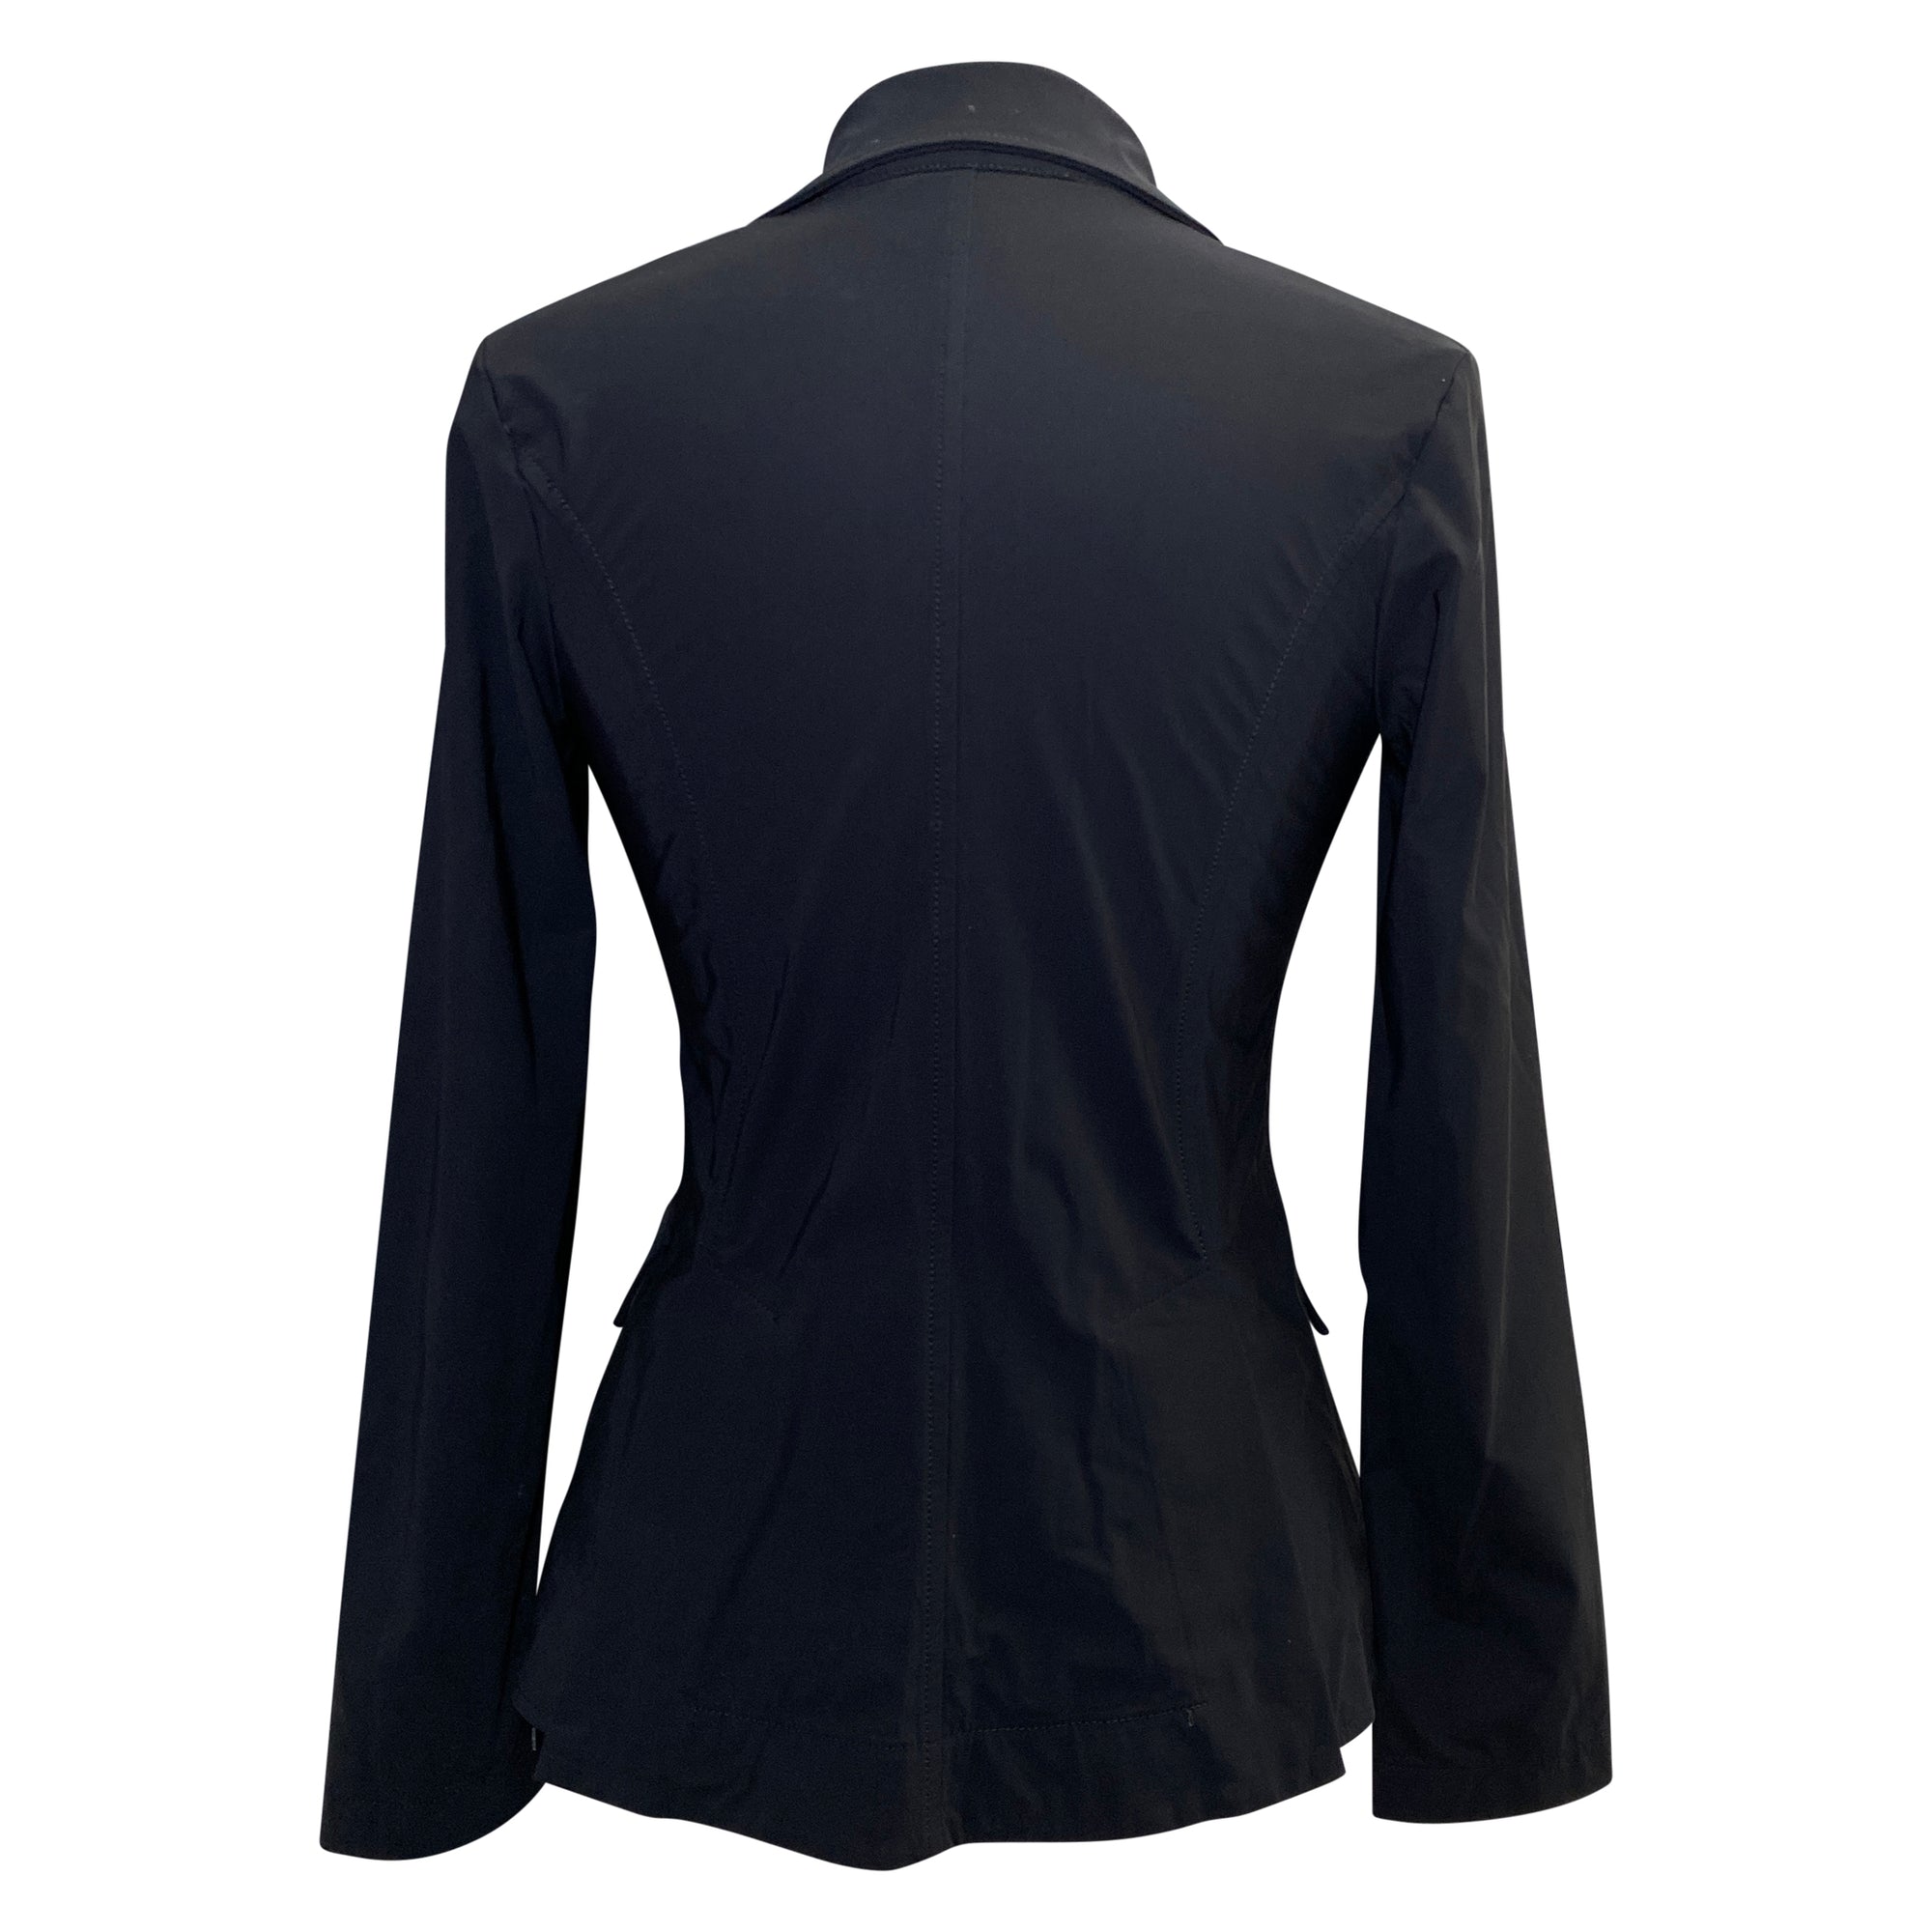 Back of For Horses 'Yakie' Show Jacket in Black